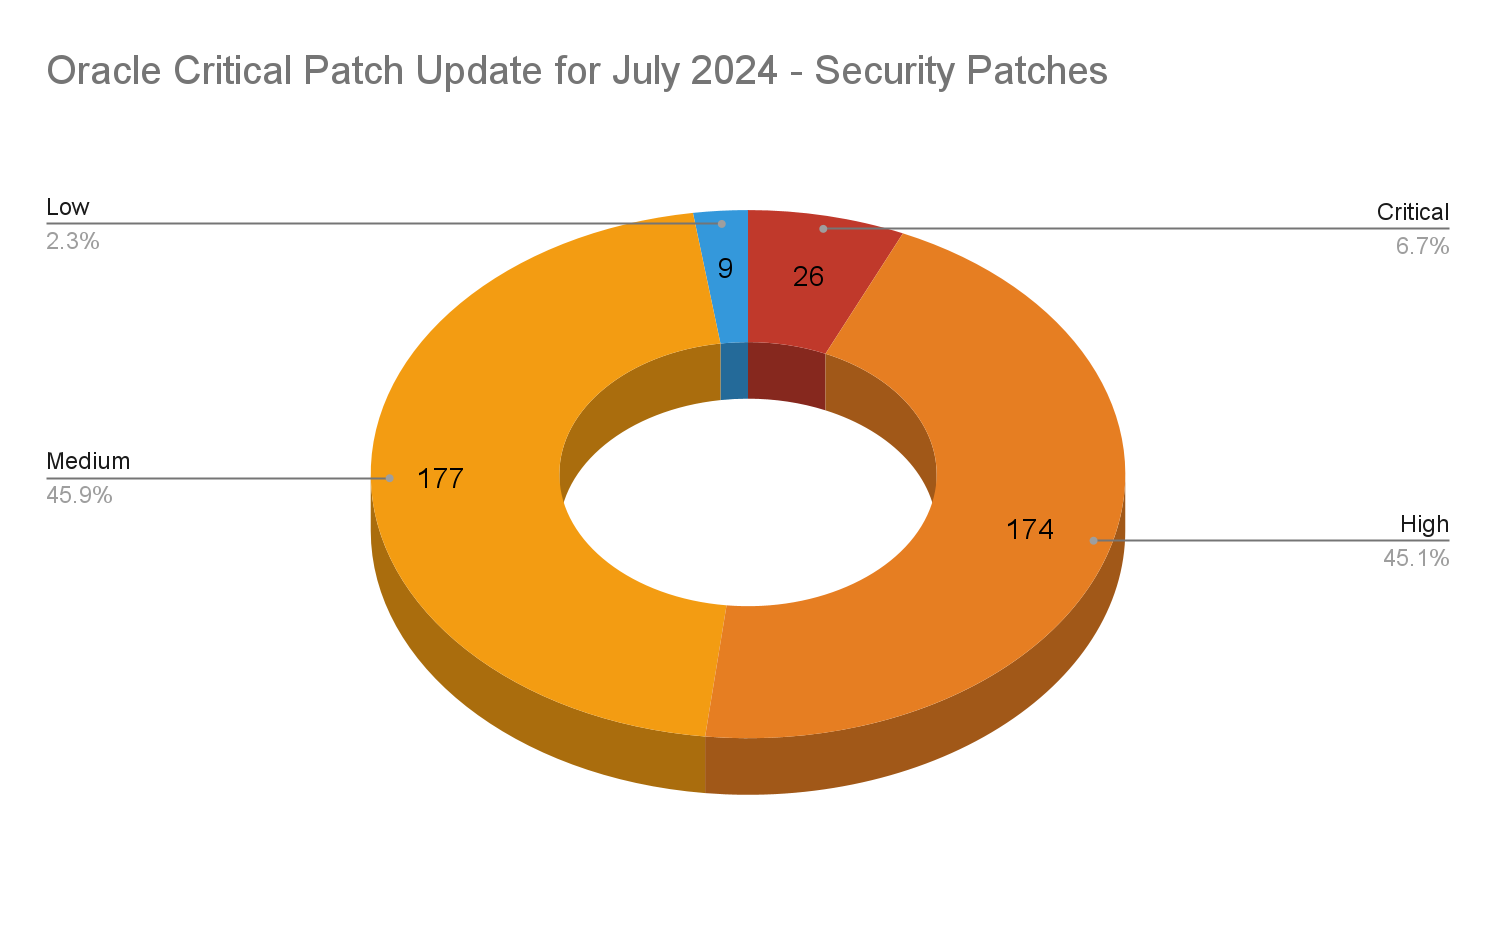 A pie chart with a hole in the center featuring metrics associated with the Oracle Critical Patch Update (CPU) for July 2024 showing a breakdown of security patches from Critical, High, Medium and Low.